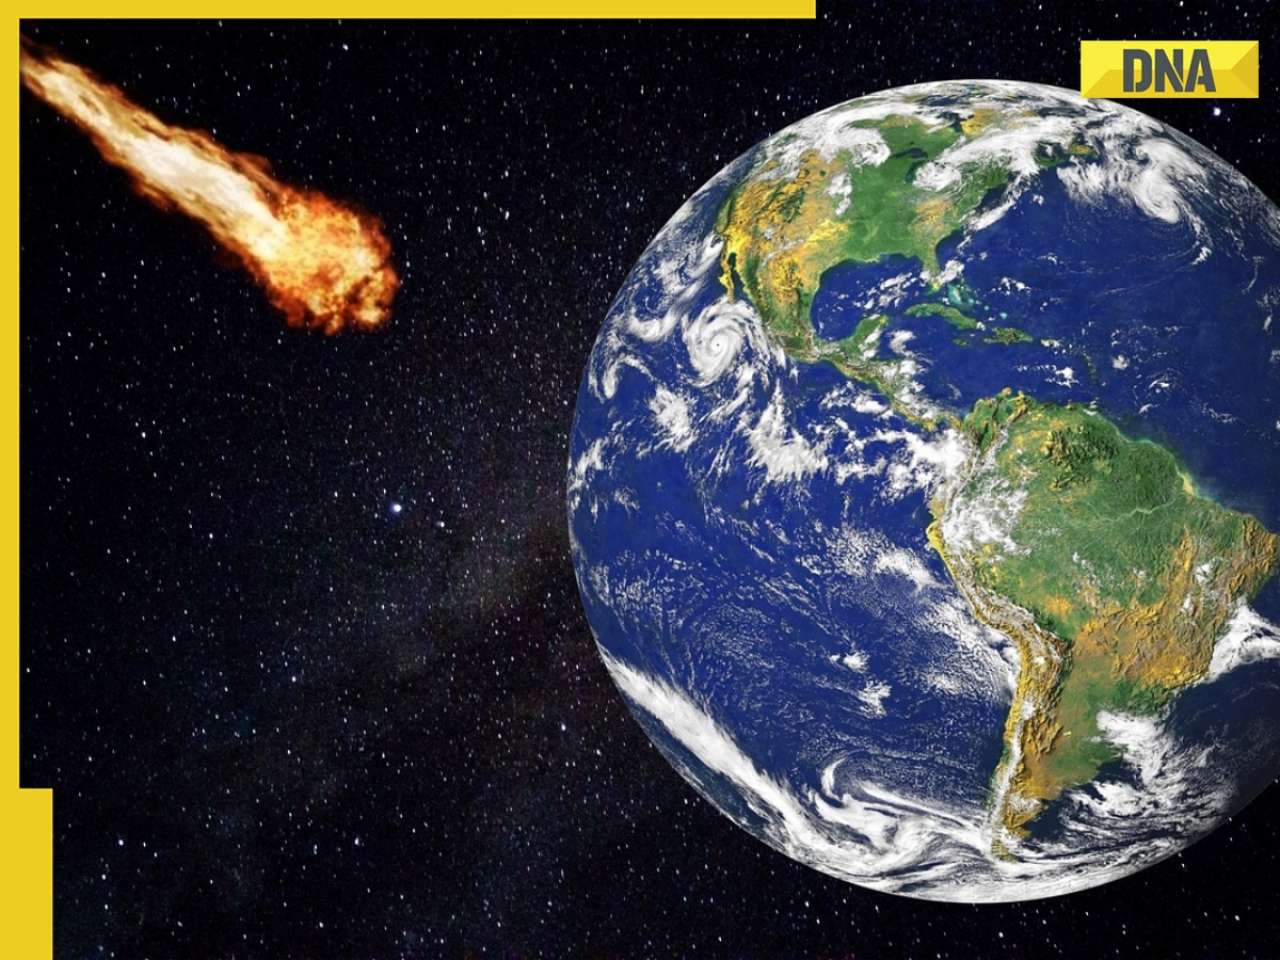 NASA on alert as two massive asteroids approaching Earth at super high speeds; know distance, risk to Earth